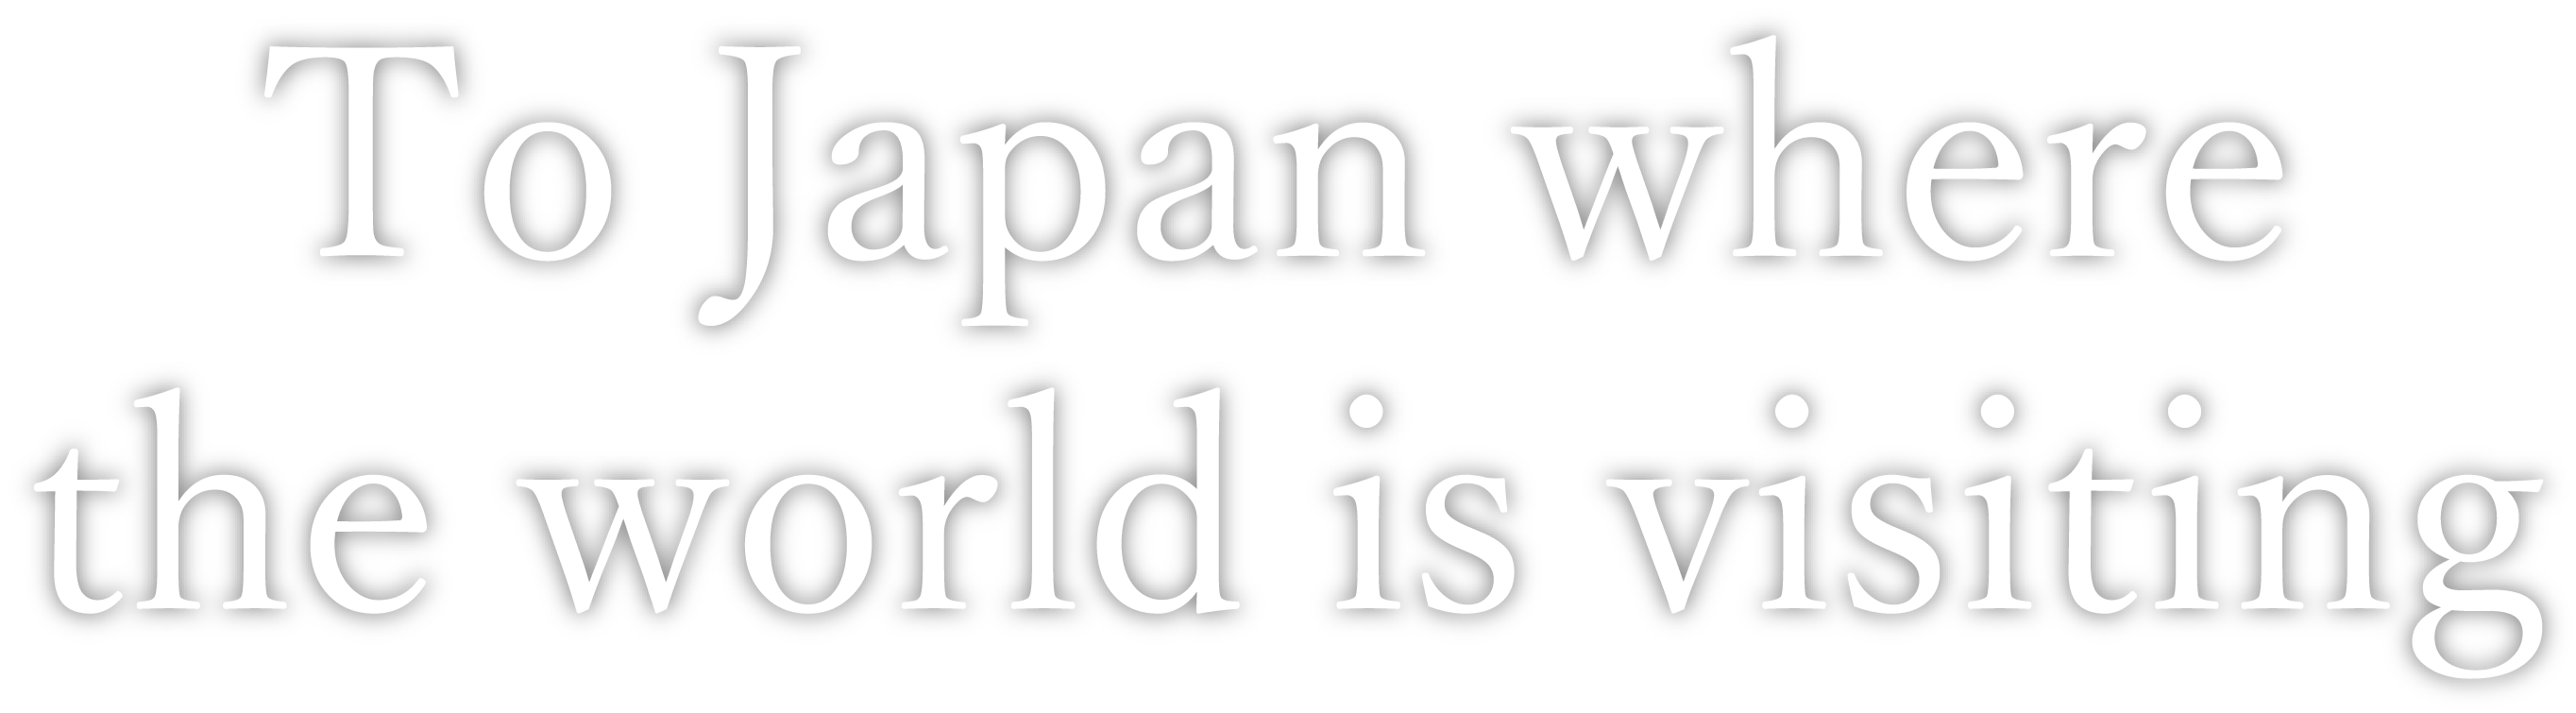 To Japan where the world is visiting